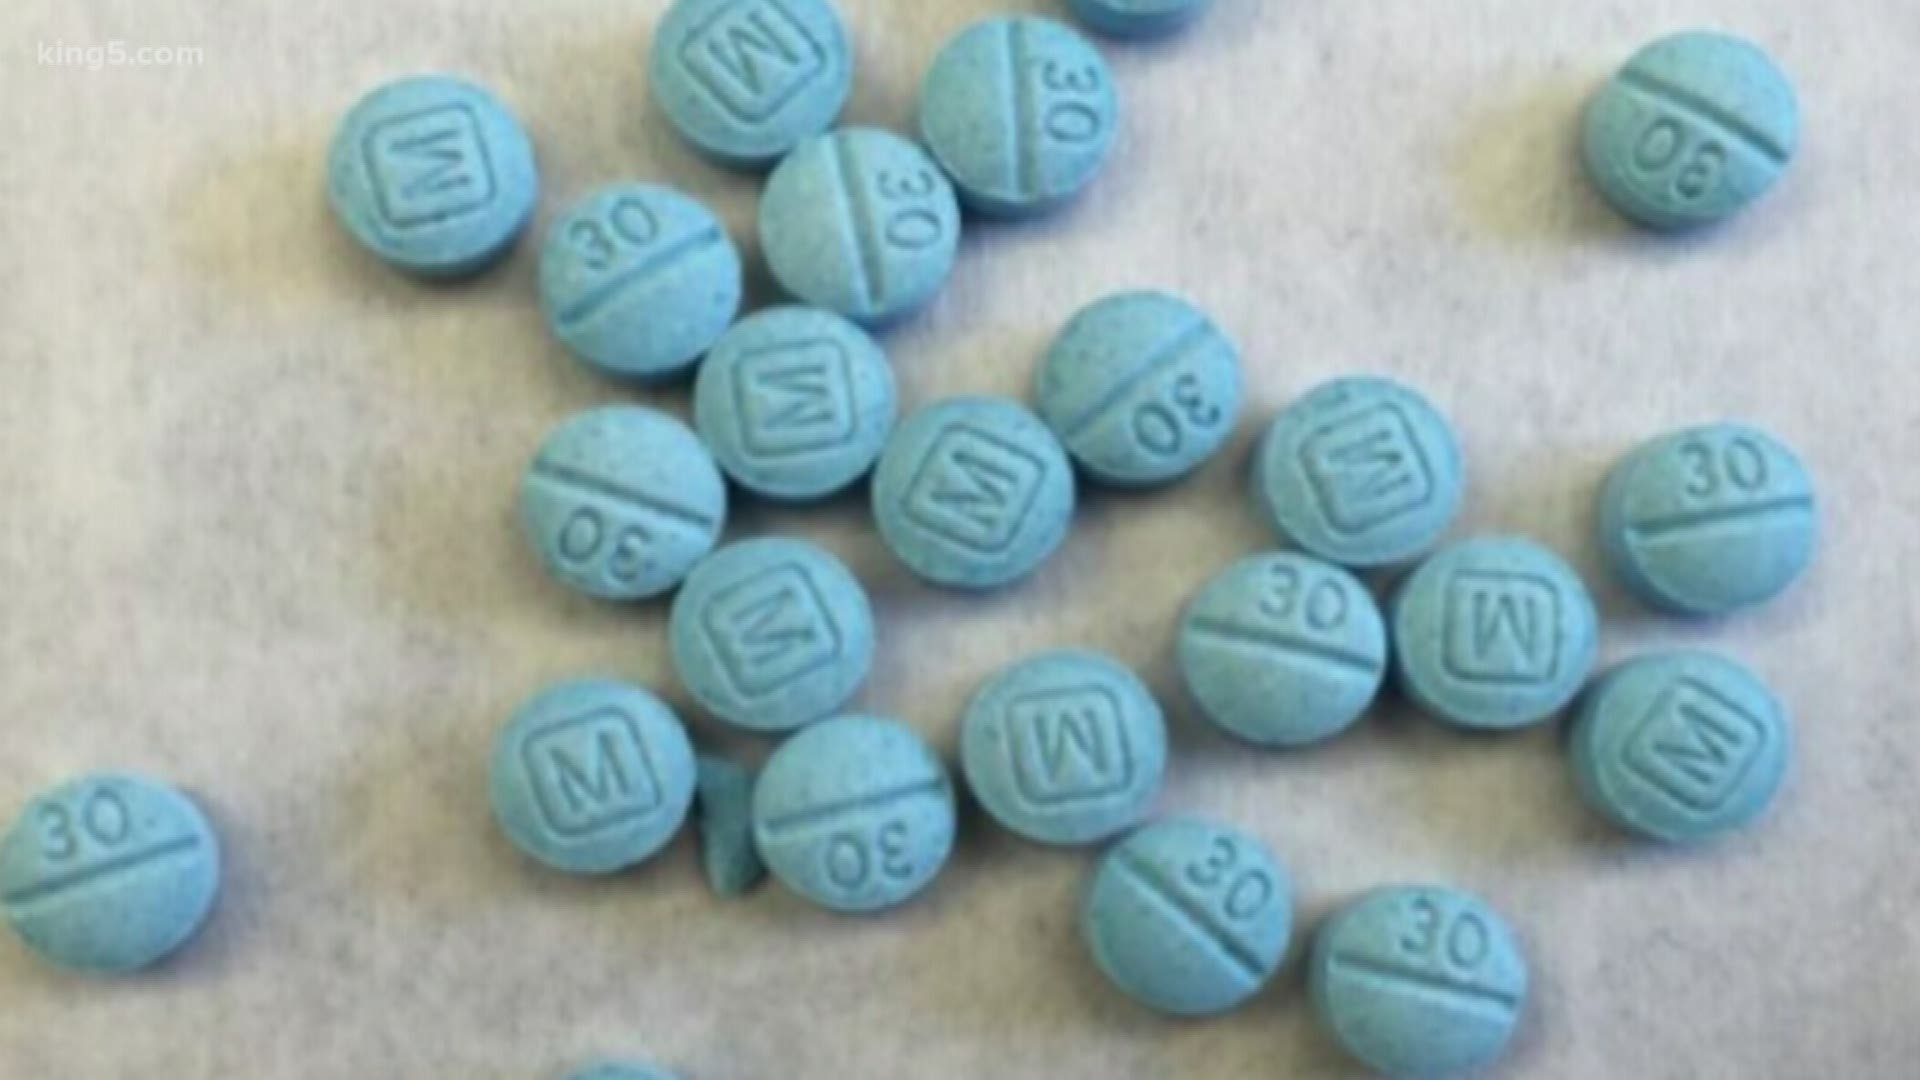 Authorities say fake pain pills are circulating around King County. The pills come in many colors and carry real brand stamps to make them look legitimate.